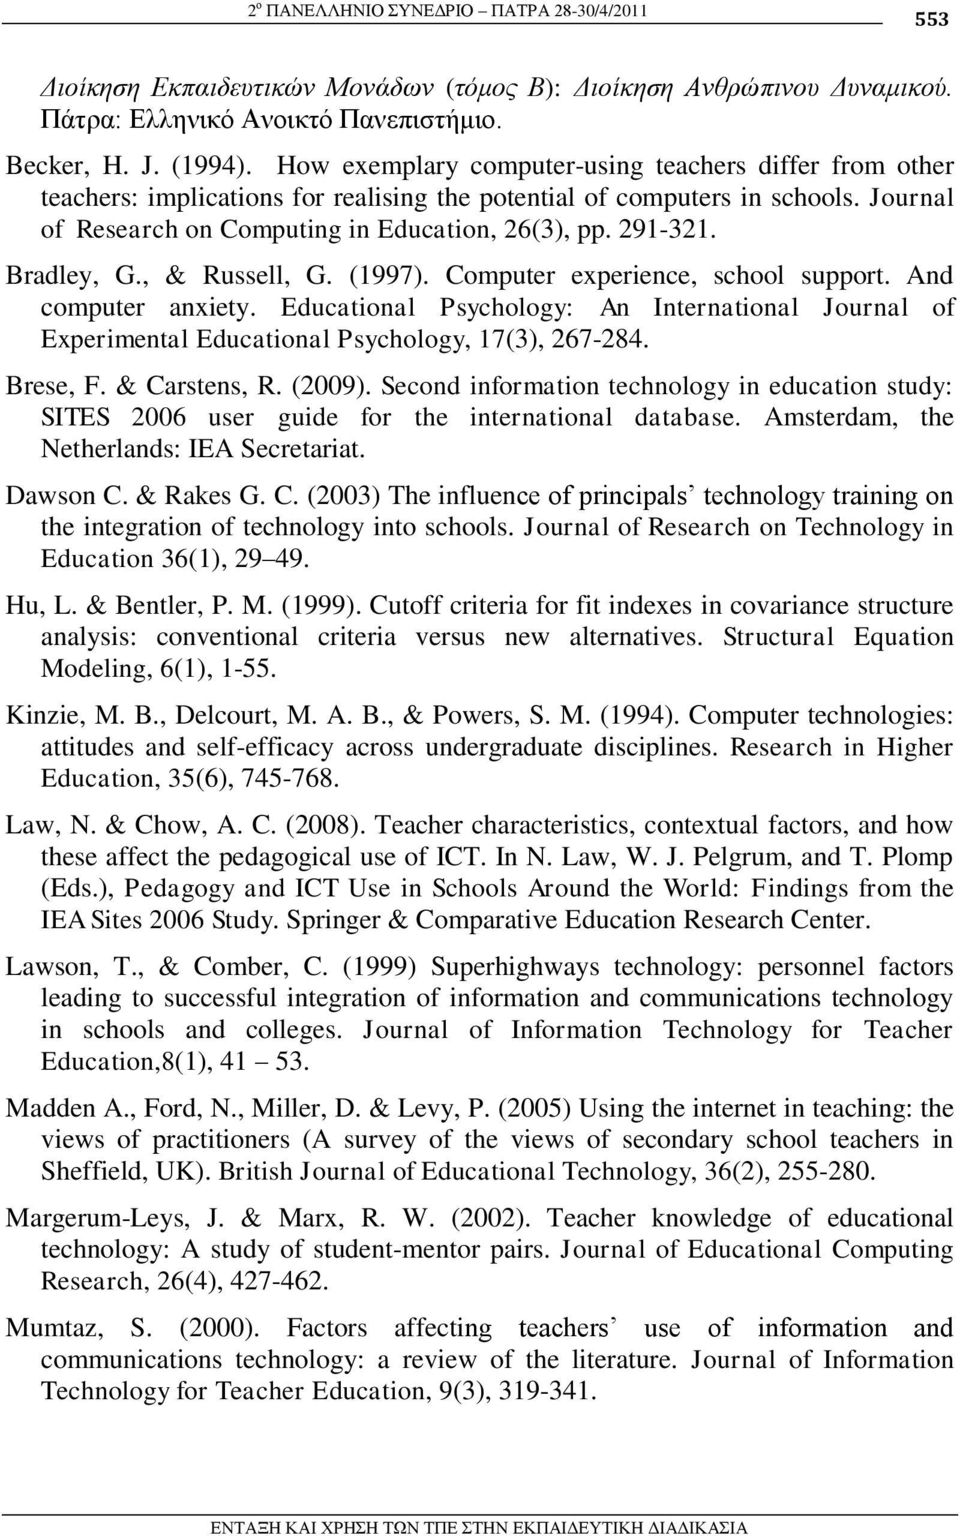 Bradley, G., & Russell, G. (1997). Computer experience, school support. And computer anxiety. Educational Psychology: An International Journal of Experimental Educational Psychology, 17(3), 267-284.